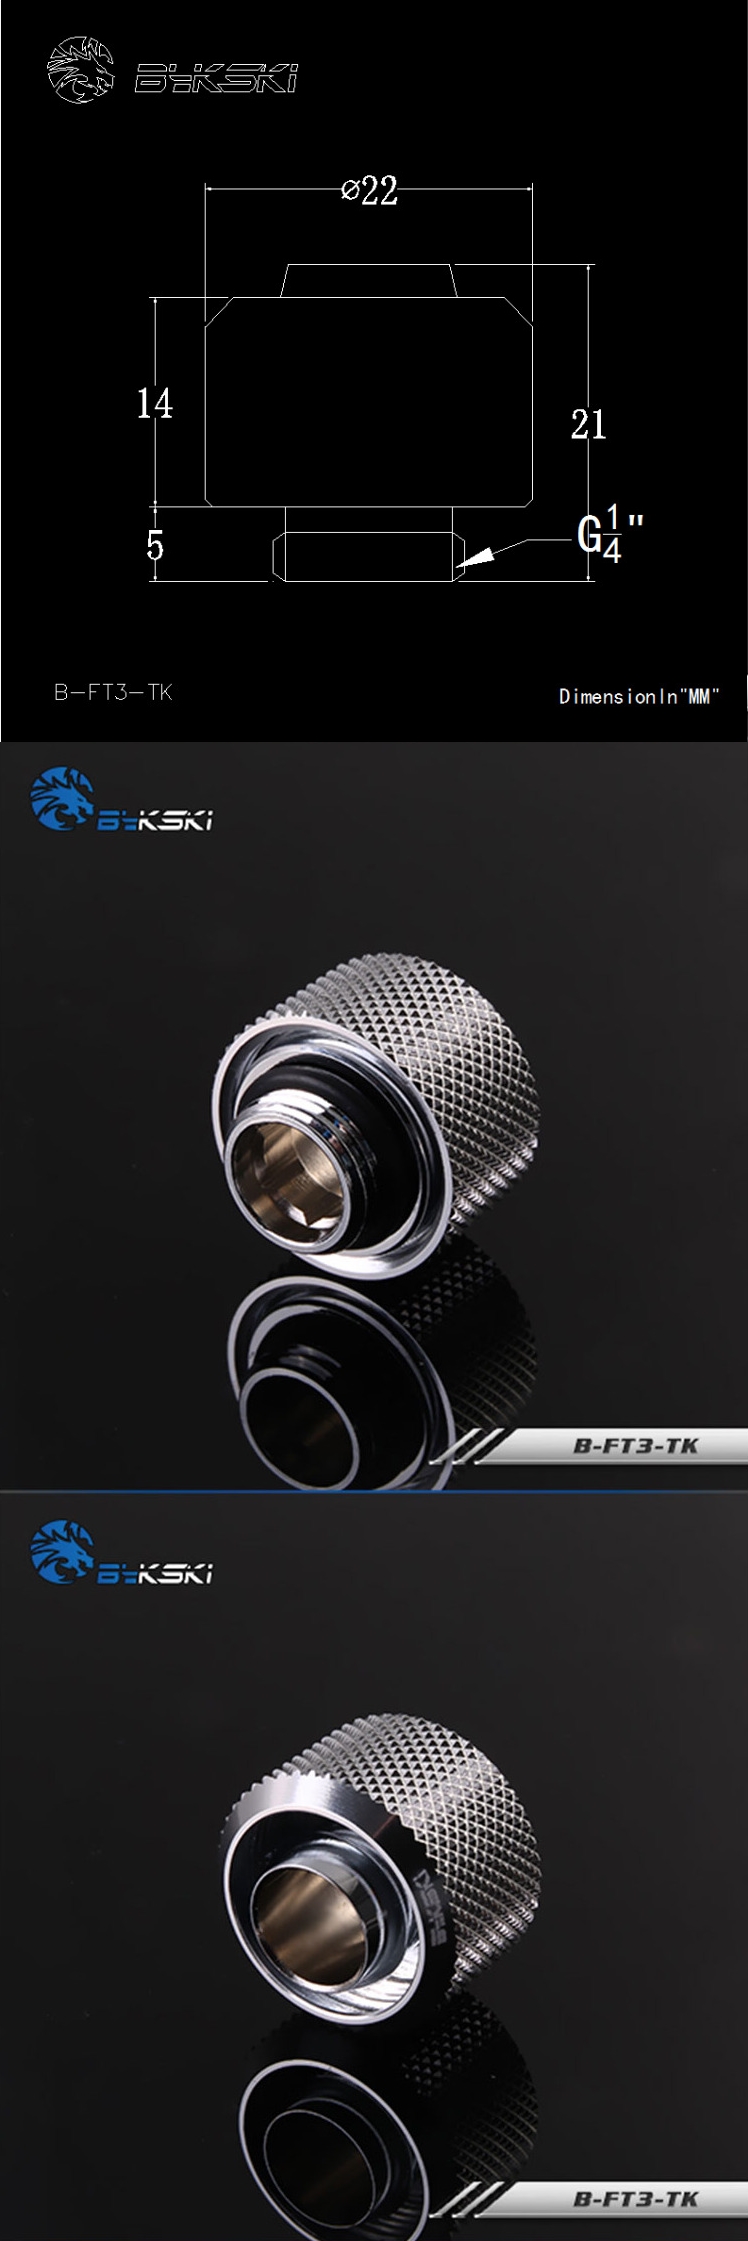 A large marketing image providing additional information about the product Bykski G1/4 10mm Soft Tube Compression Fitting - Silver - Additional alt info not provided